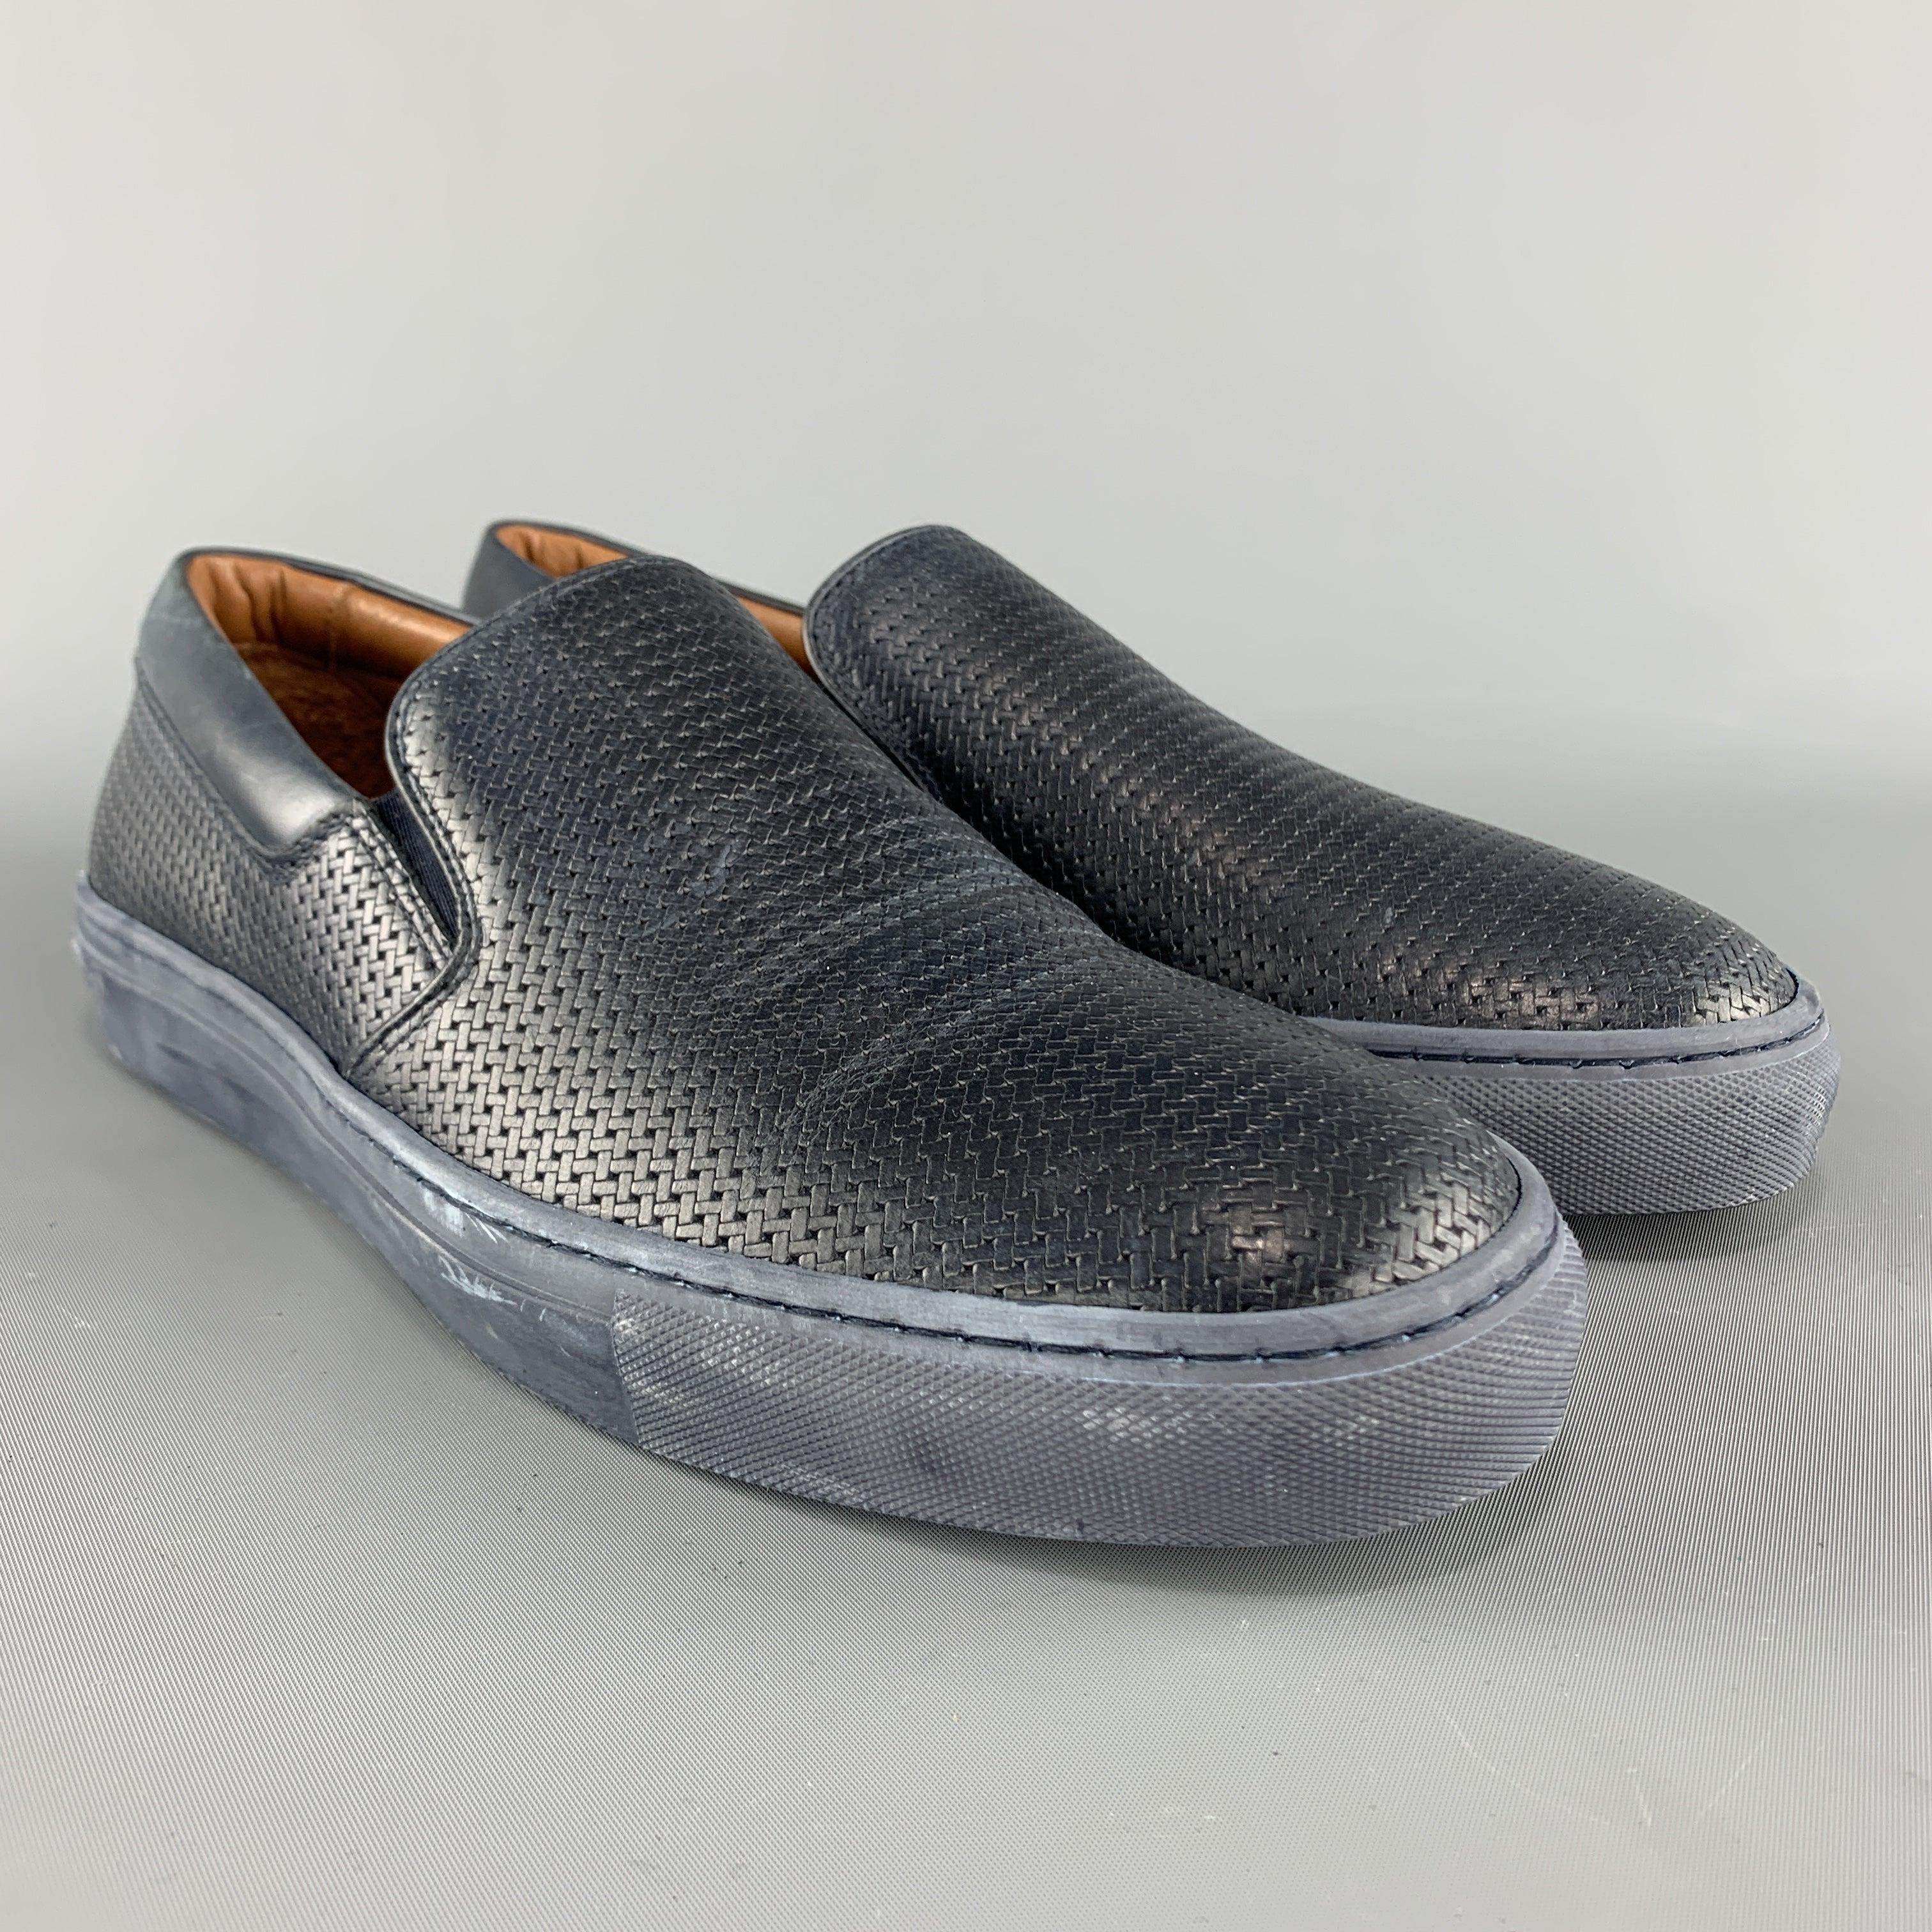 AQUATALIA slip on sneakers come in navy woven leather with a tonal rubber sole. Wear throughout. Made in Italy.Good
Pre-Owned Condition. 

Marked:   US 10Outsole: 11.75 x 4 inches 
  
  
 
Reference: 101160
Category: Sneakers
More Details
   